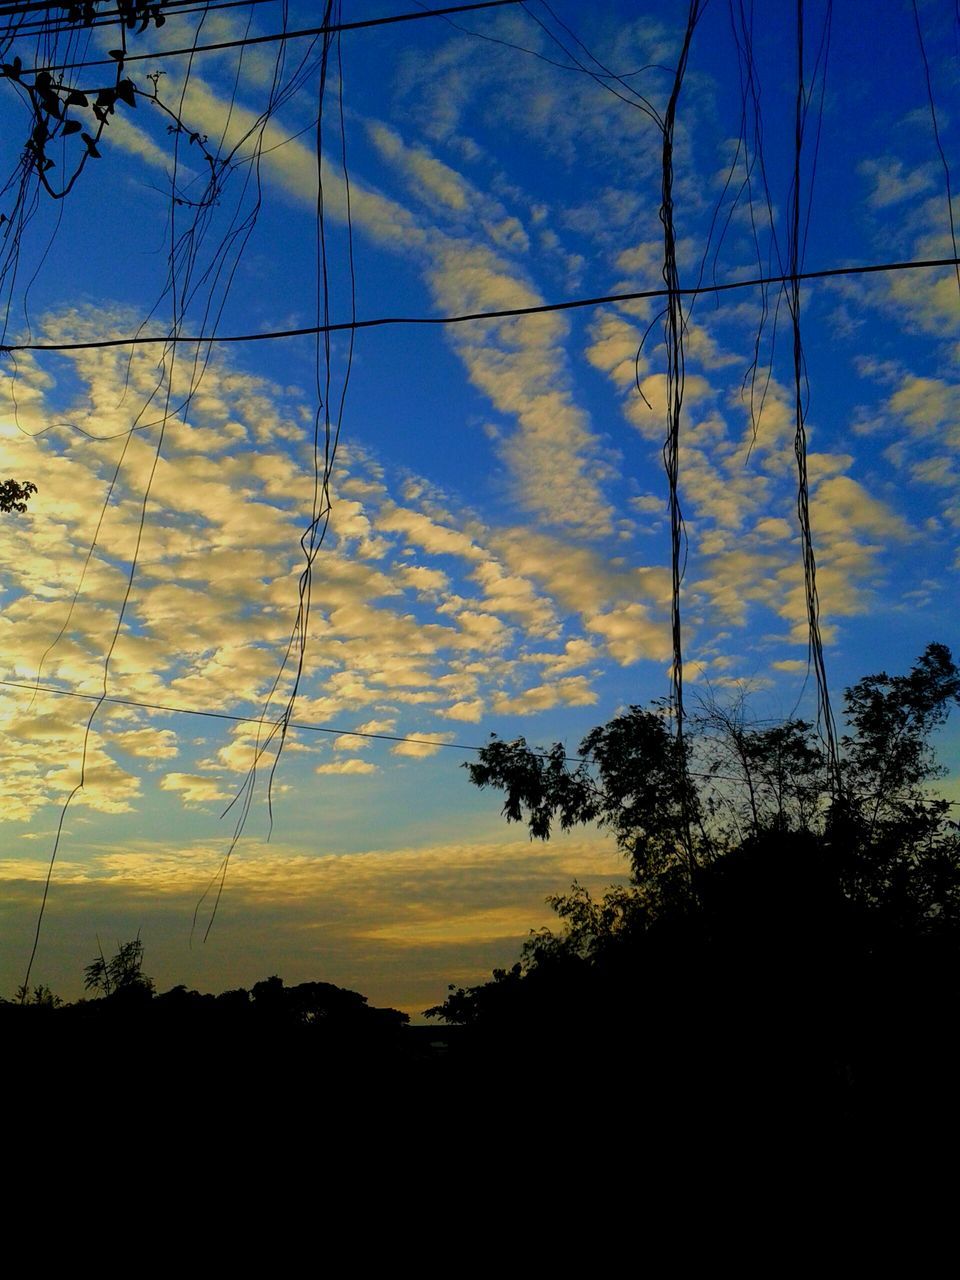 power line, electricity pylon, power supply, electricity, silhouette, cable, sky, sunset, connection, fuel and power generation, low angle view, power cable, technology, tree, tranquility, blue, cloud - sky, beauty in nature, scenics, nature